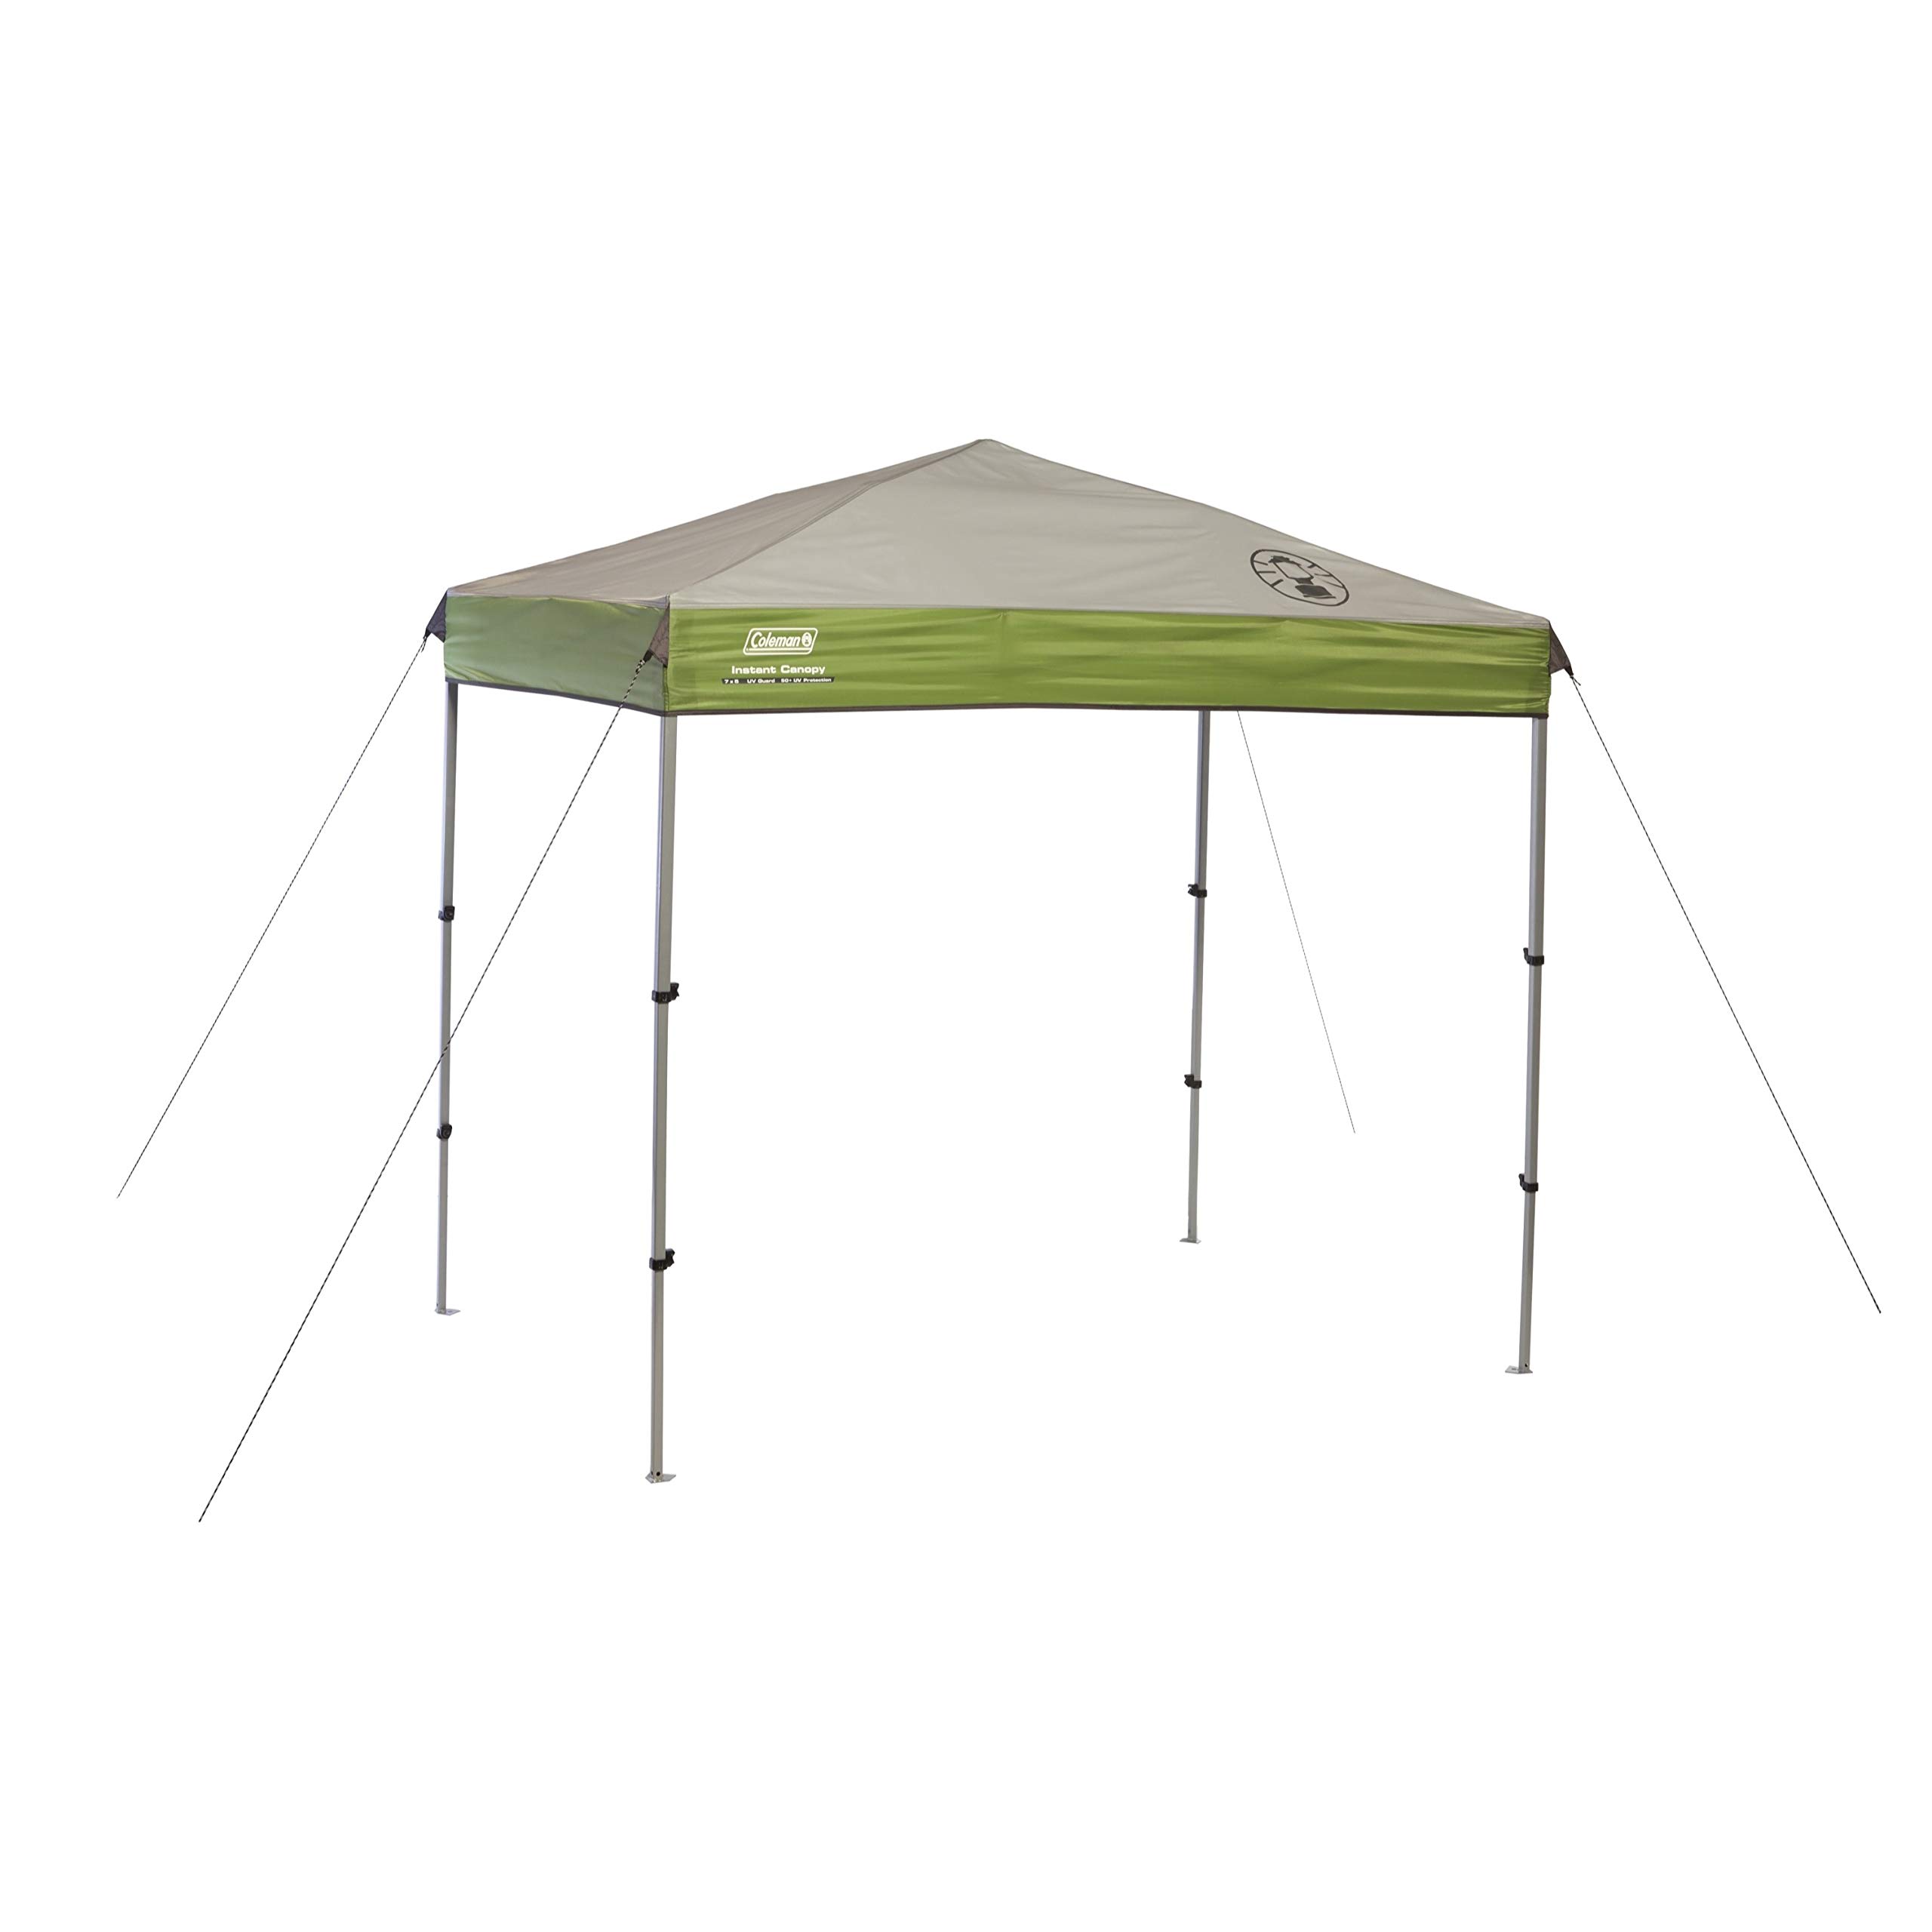 10' x 10' Coleman Canopy Tent Sun Shelter w/ Instant Setup $95.94 + Free Shipping